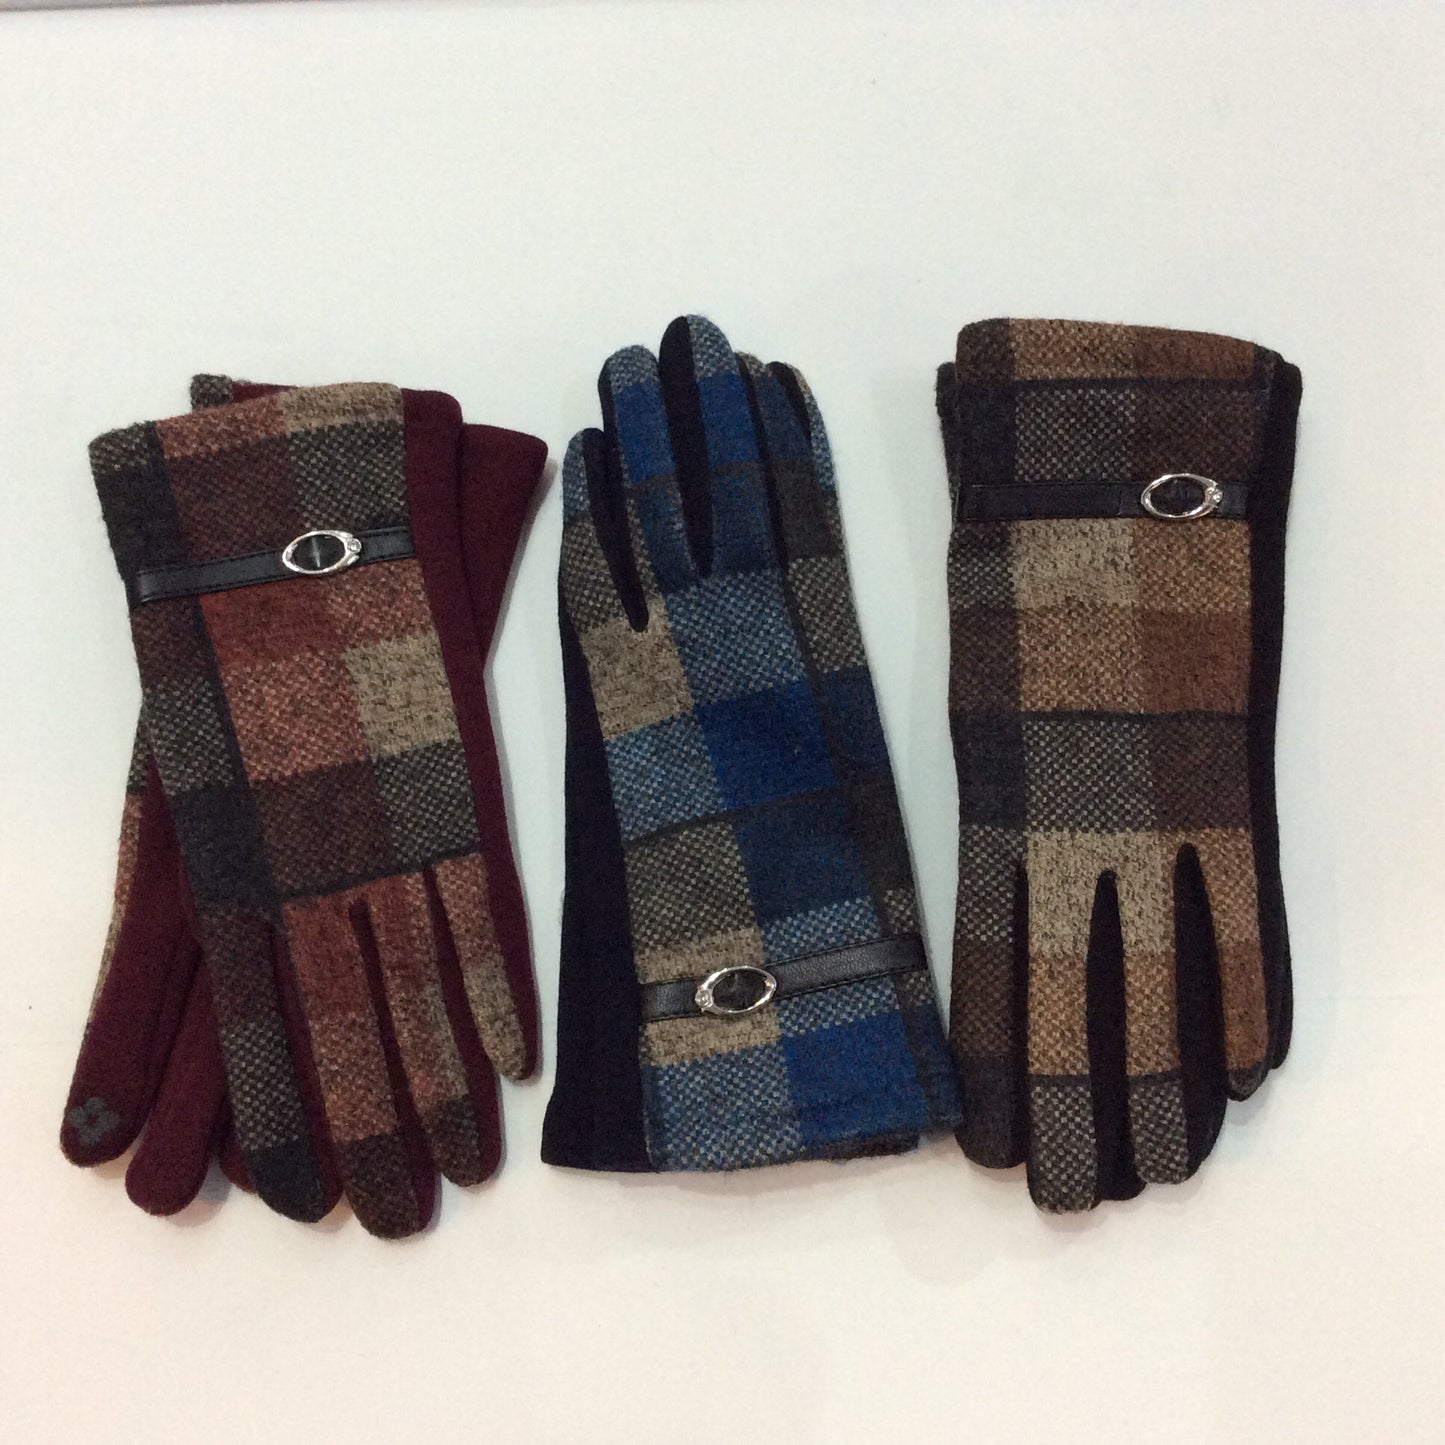 Plaid gloves with leather buckle trim